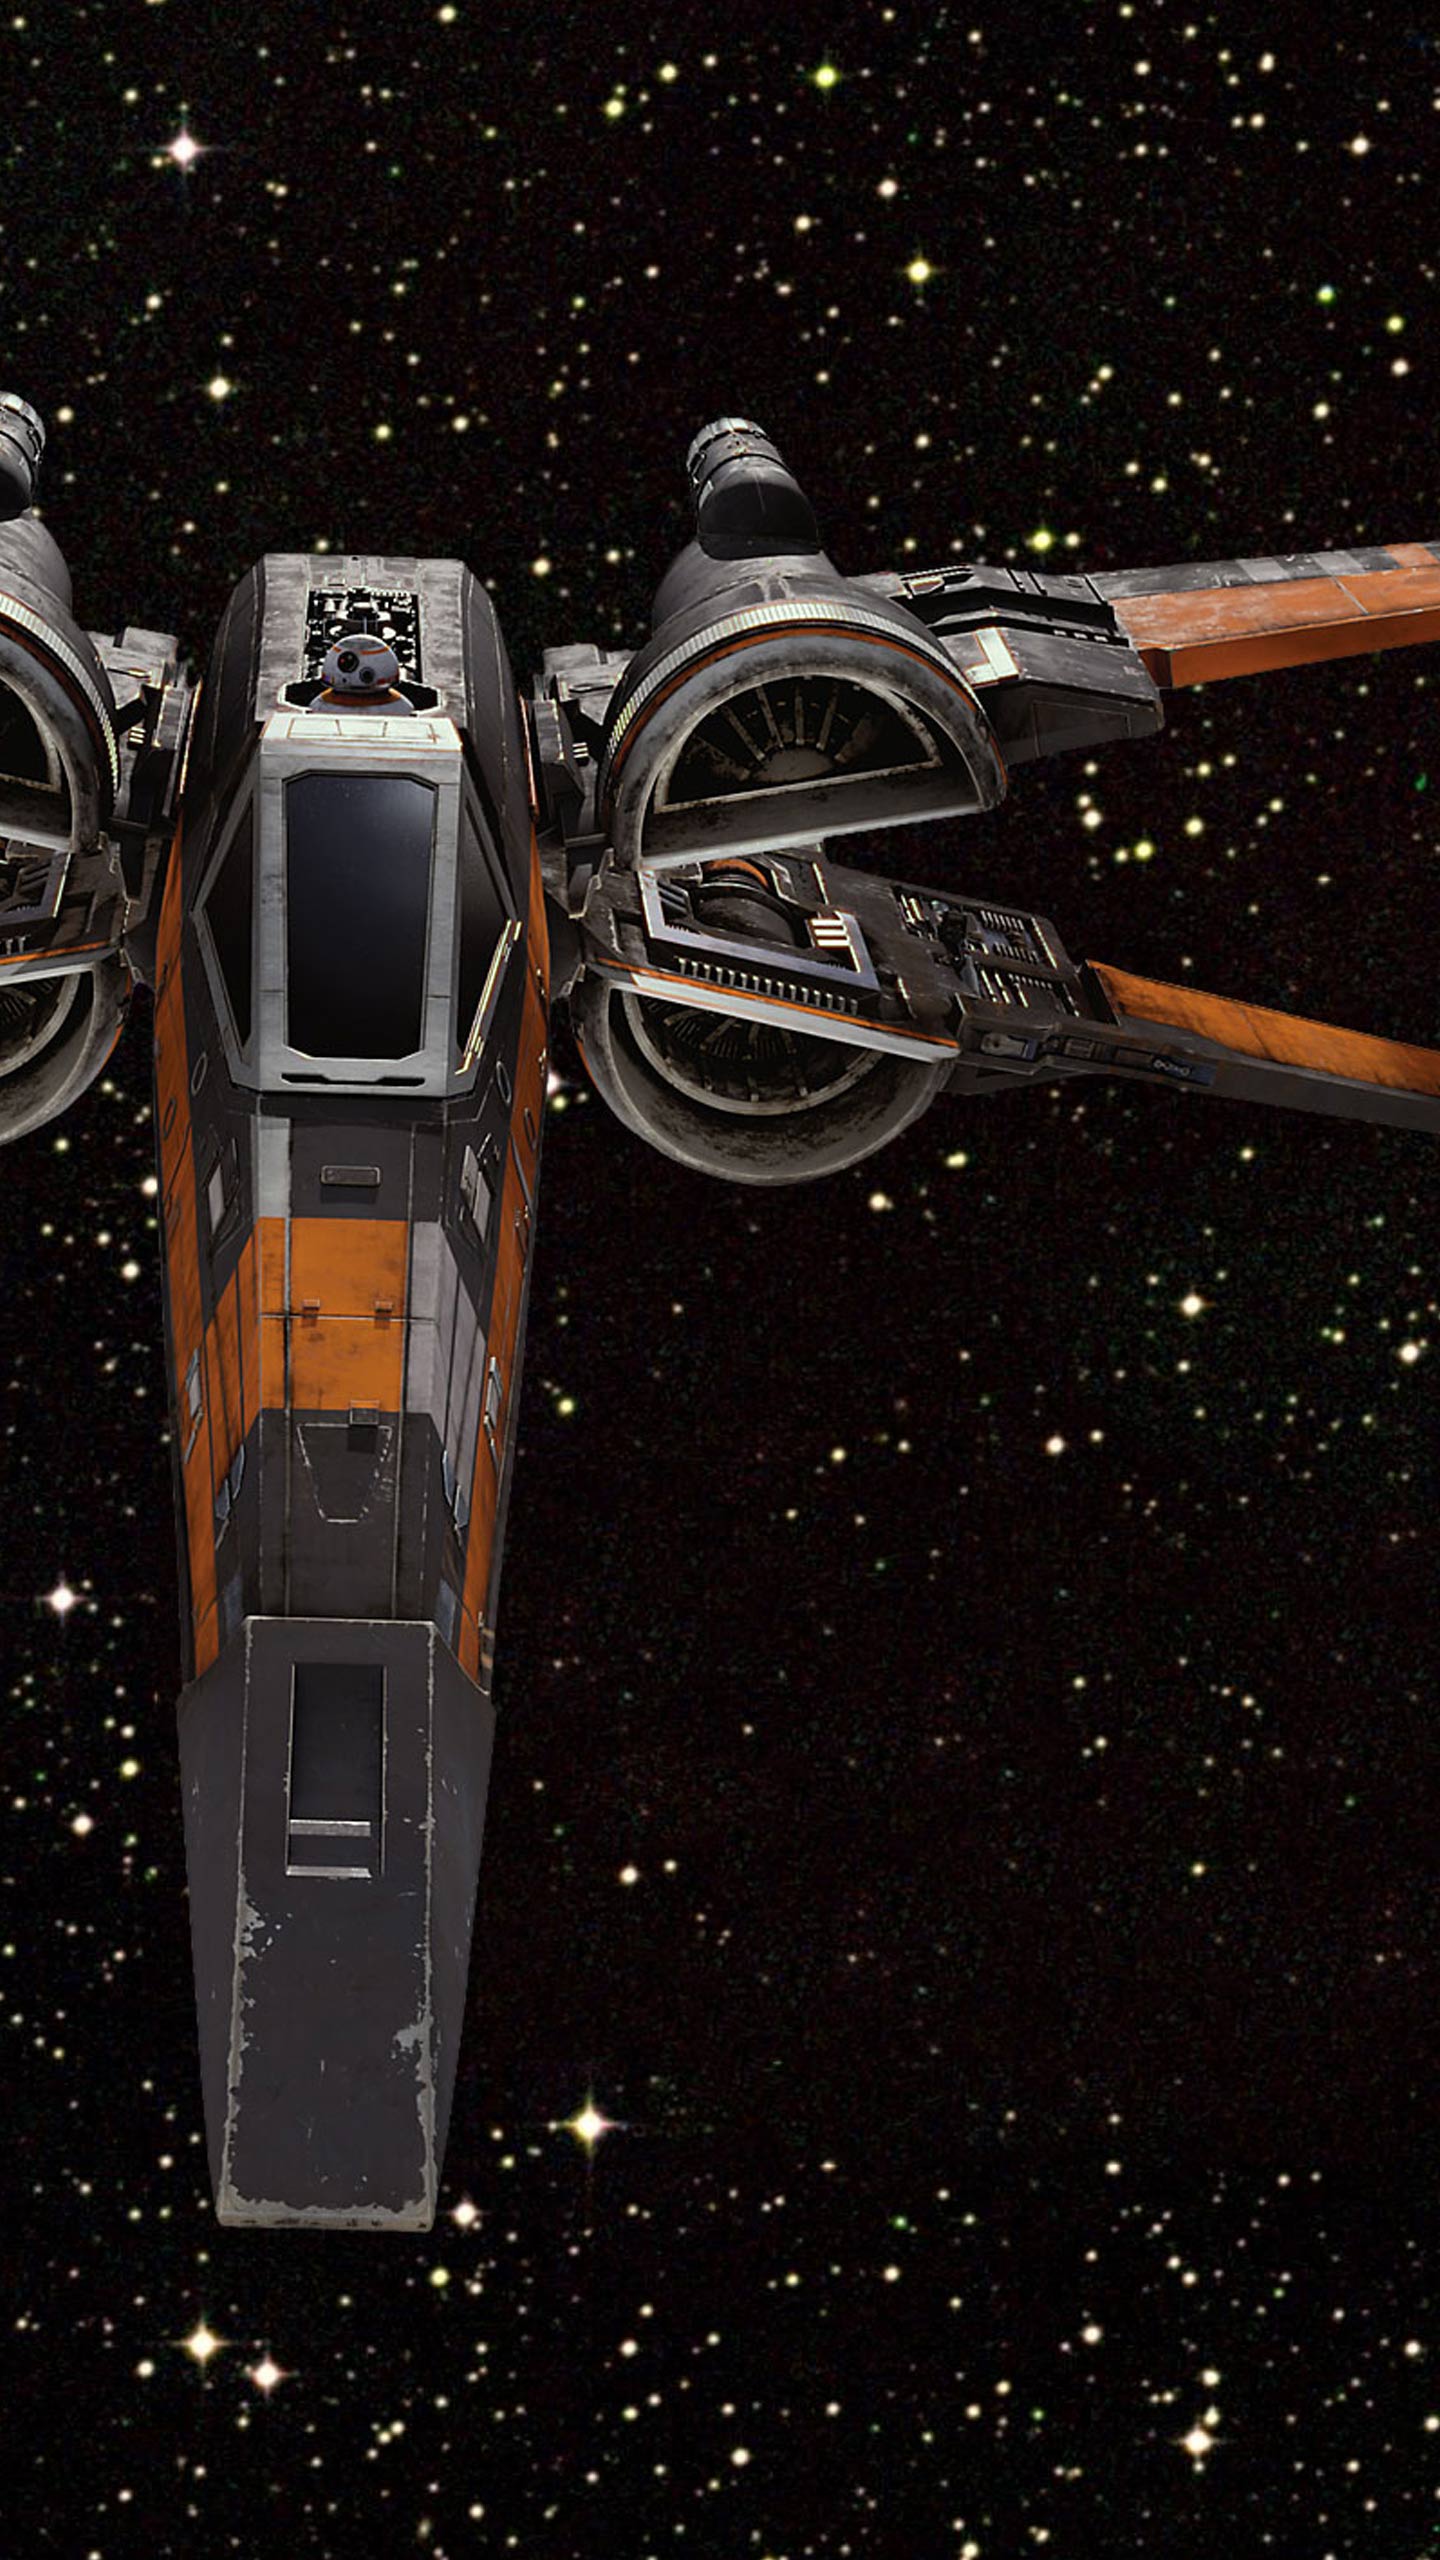 Star Wars: The Force Awakens wallpapers for your iPhone 6s and ...